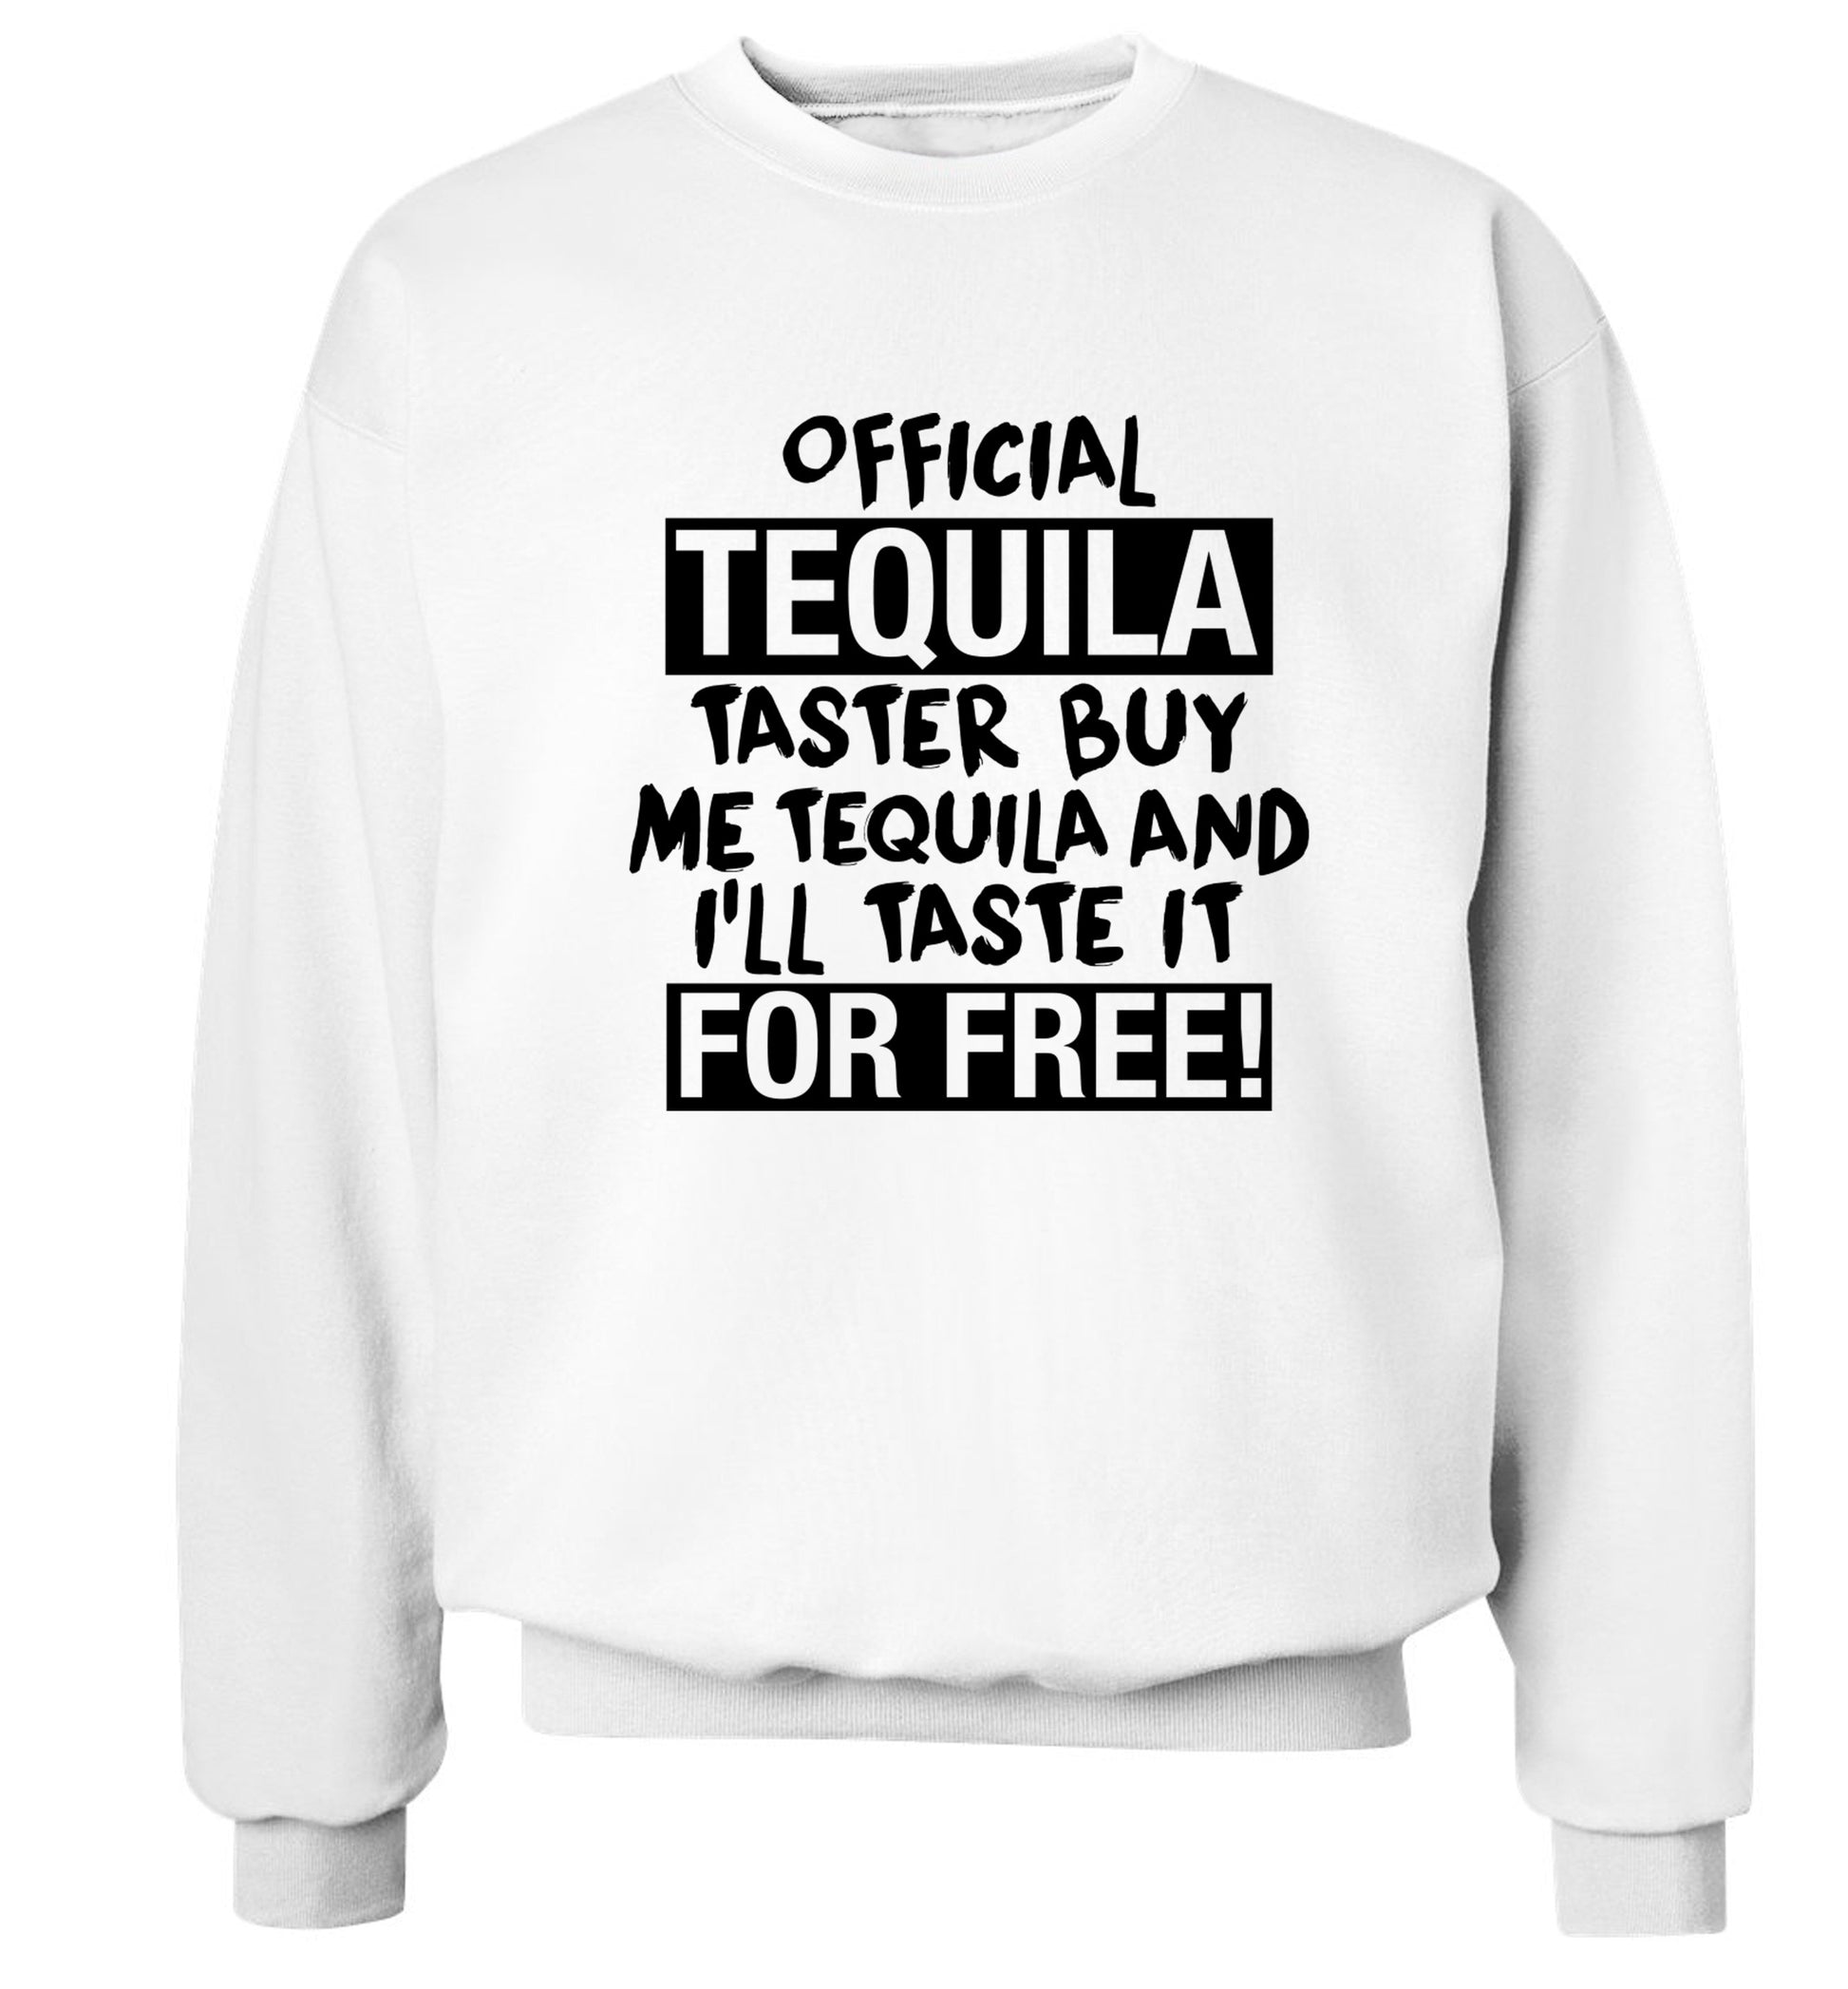 Official tequila taster buy me tequila and I'll taste it for free Adult's unisex white Sweater 2XL